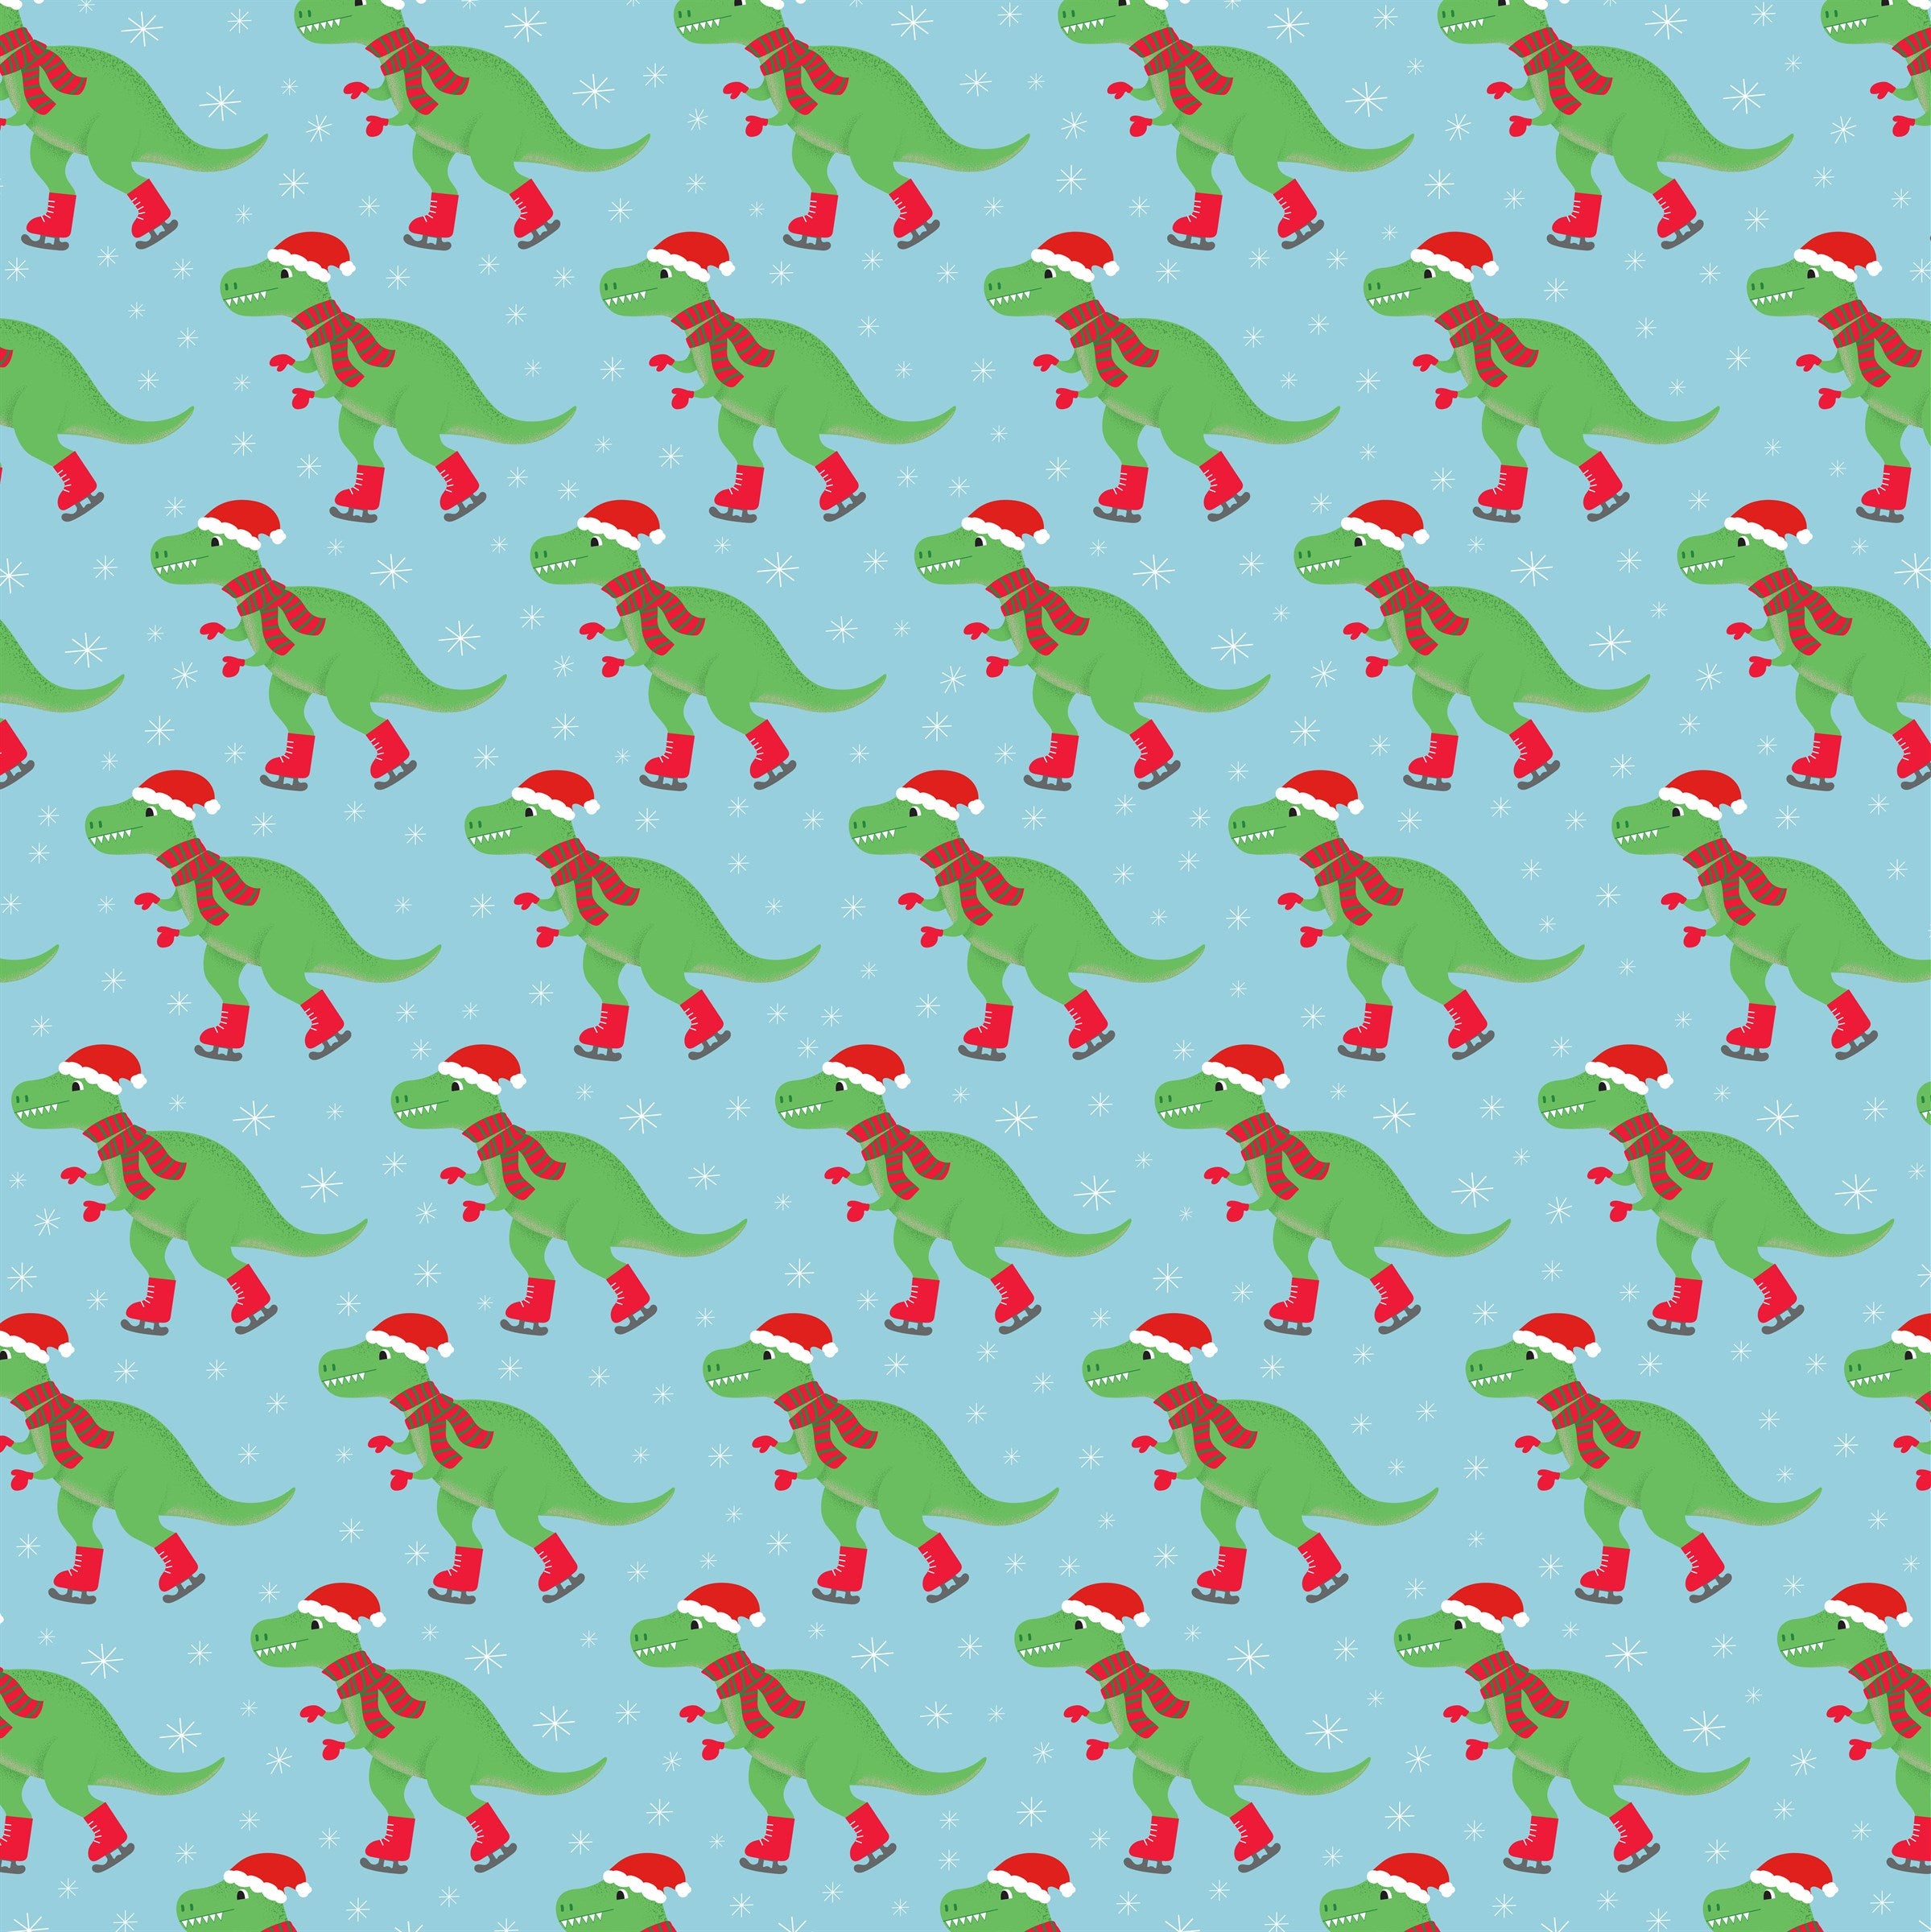 Sass and Belle Christmas Roarsome Dinosaur Wrapping Gift Wrap Paper - Kate's Cupboard